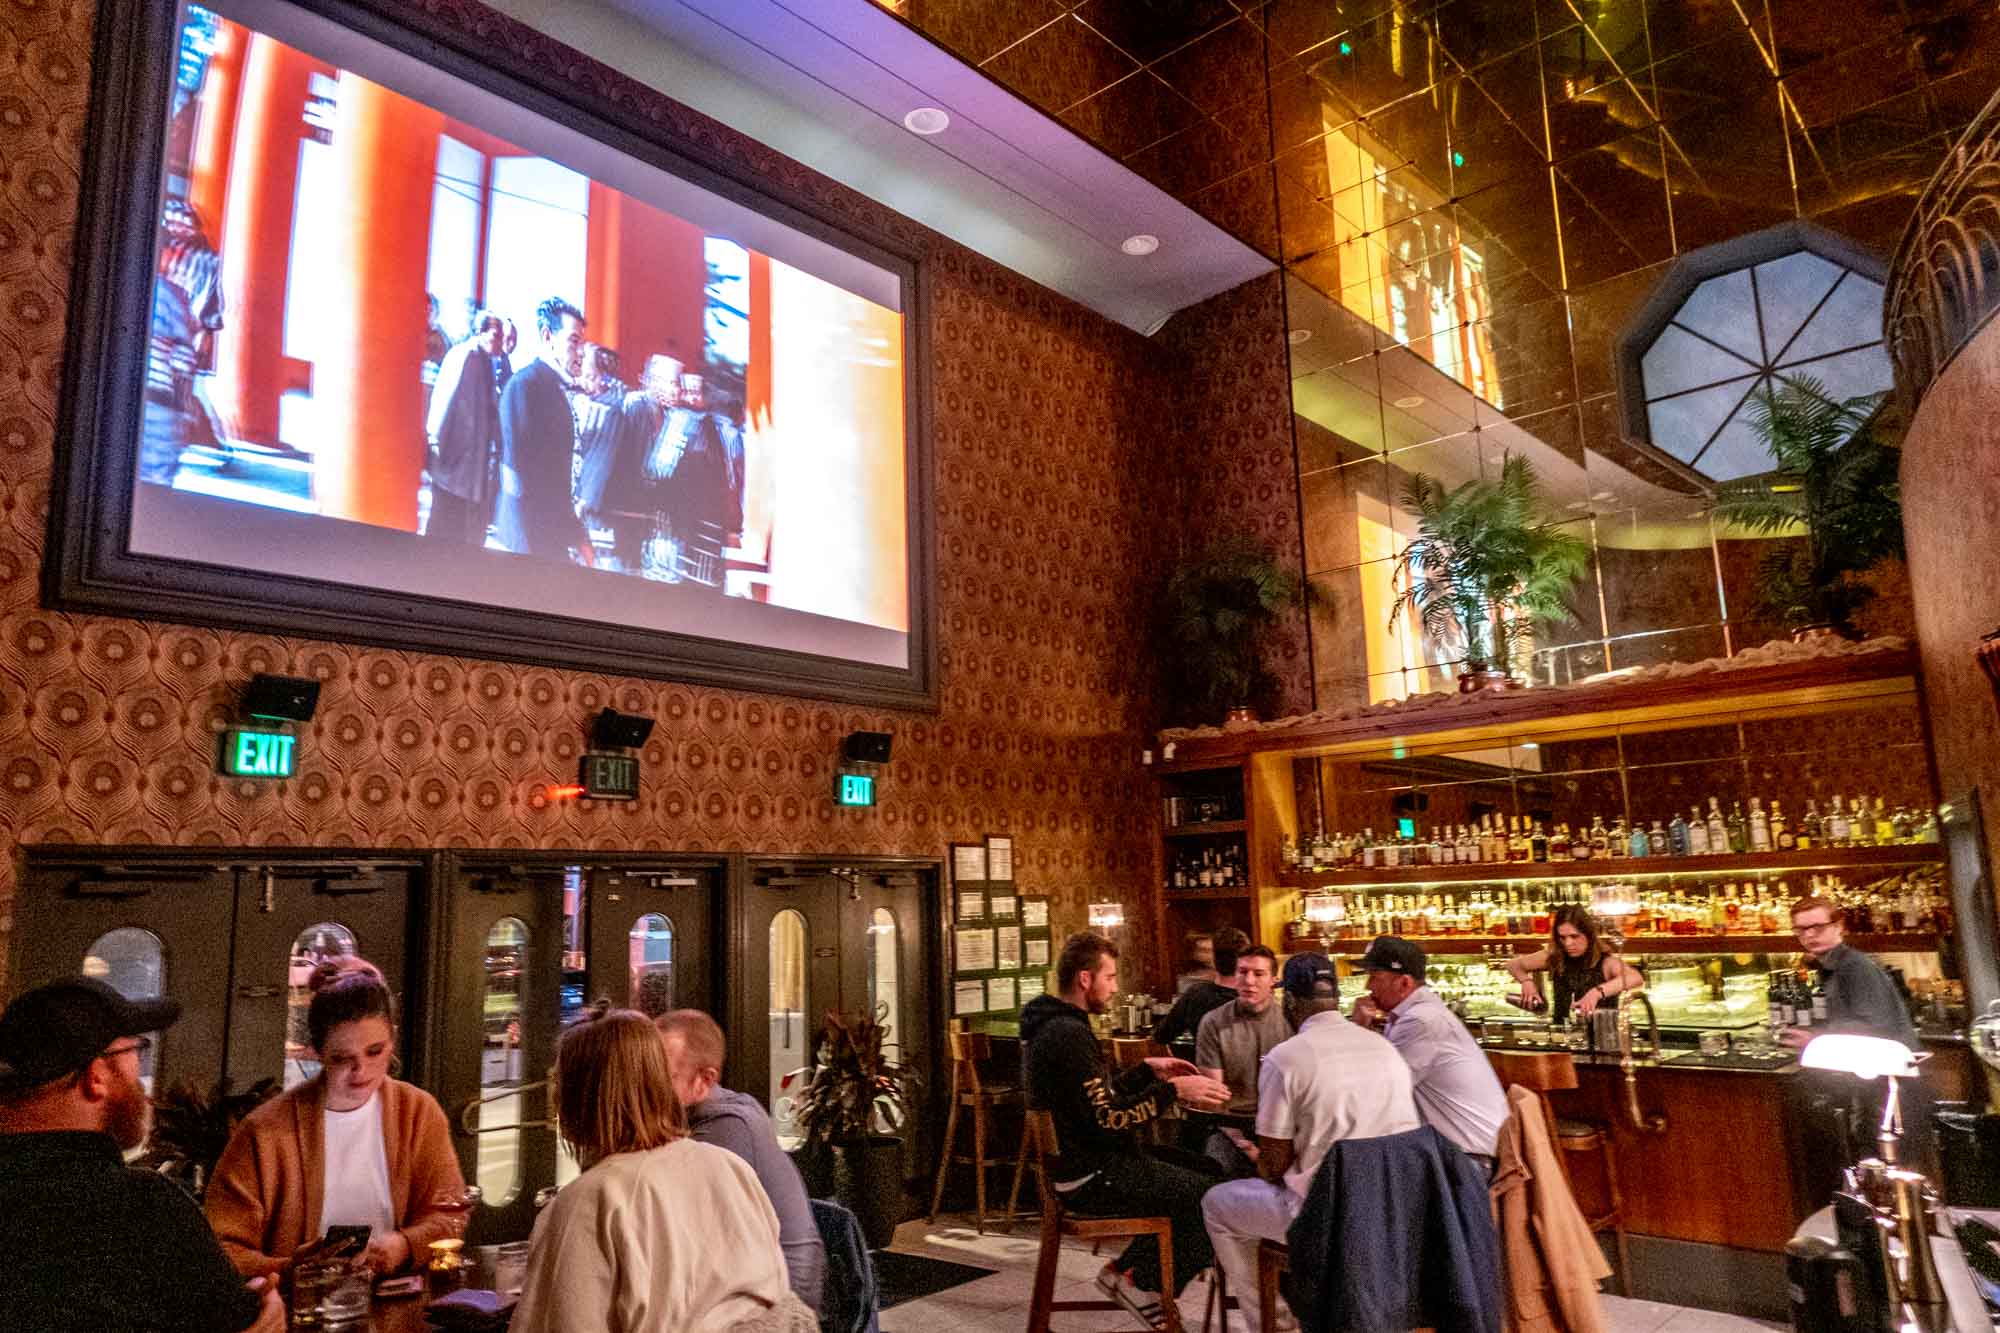 People seated at tables in a bar with a movie projected on the wall.